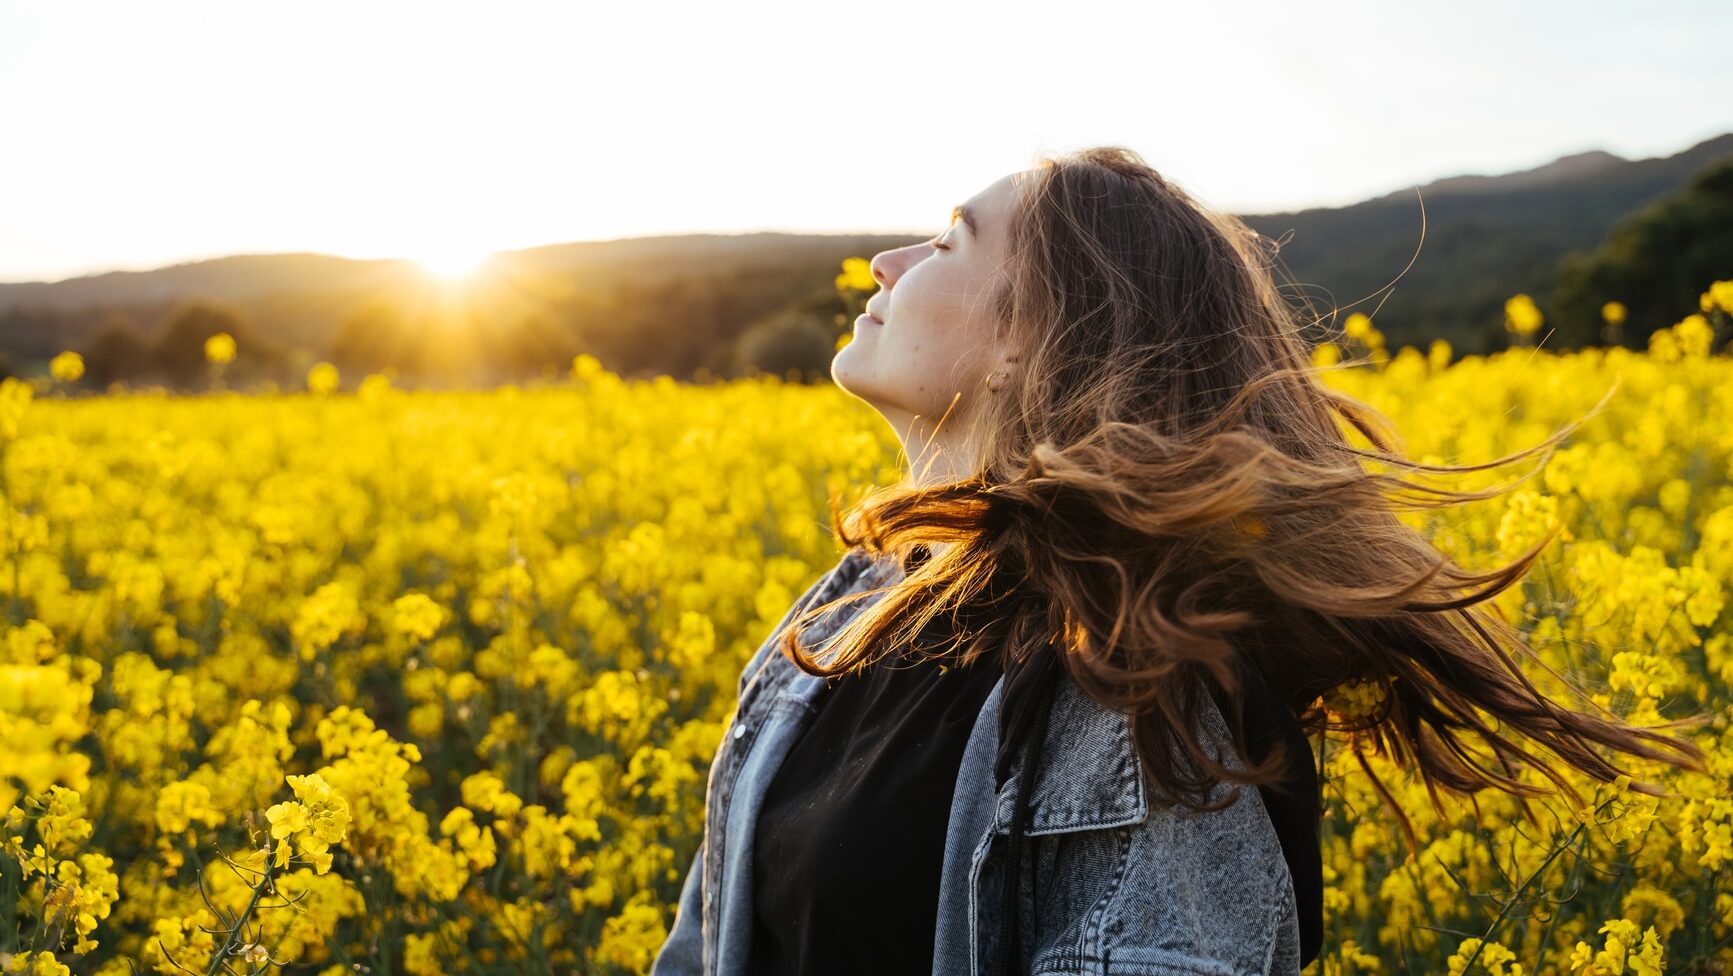 Happy young woman in buckwheat flowers field during sunset having fun and feeling free